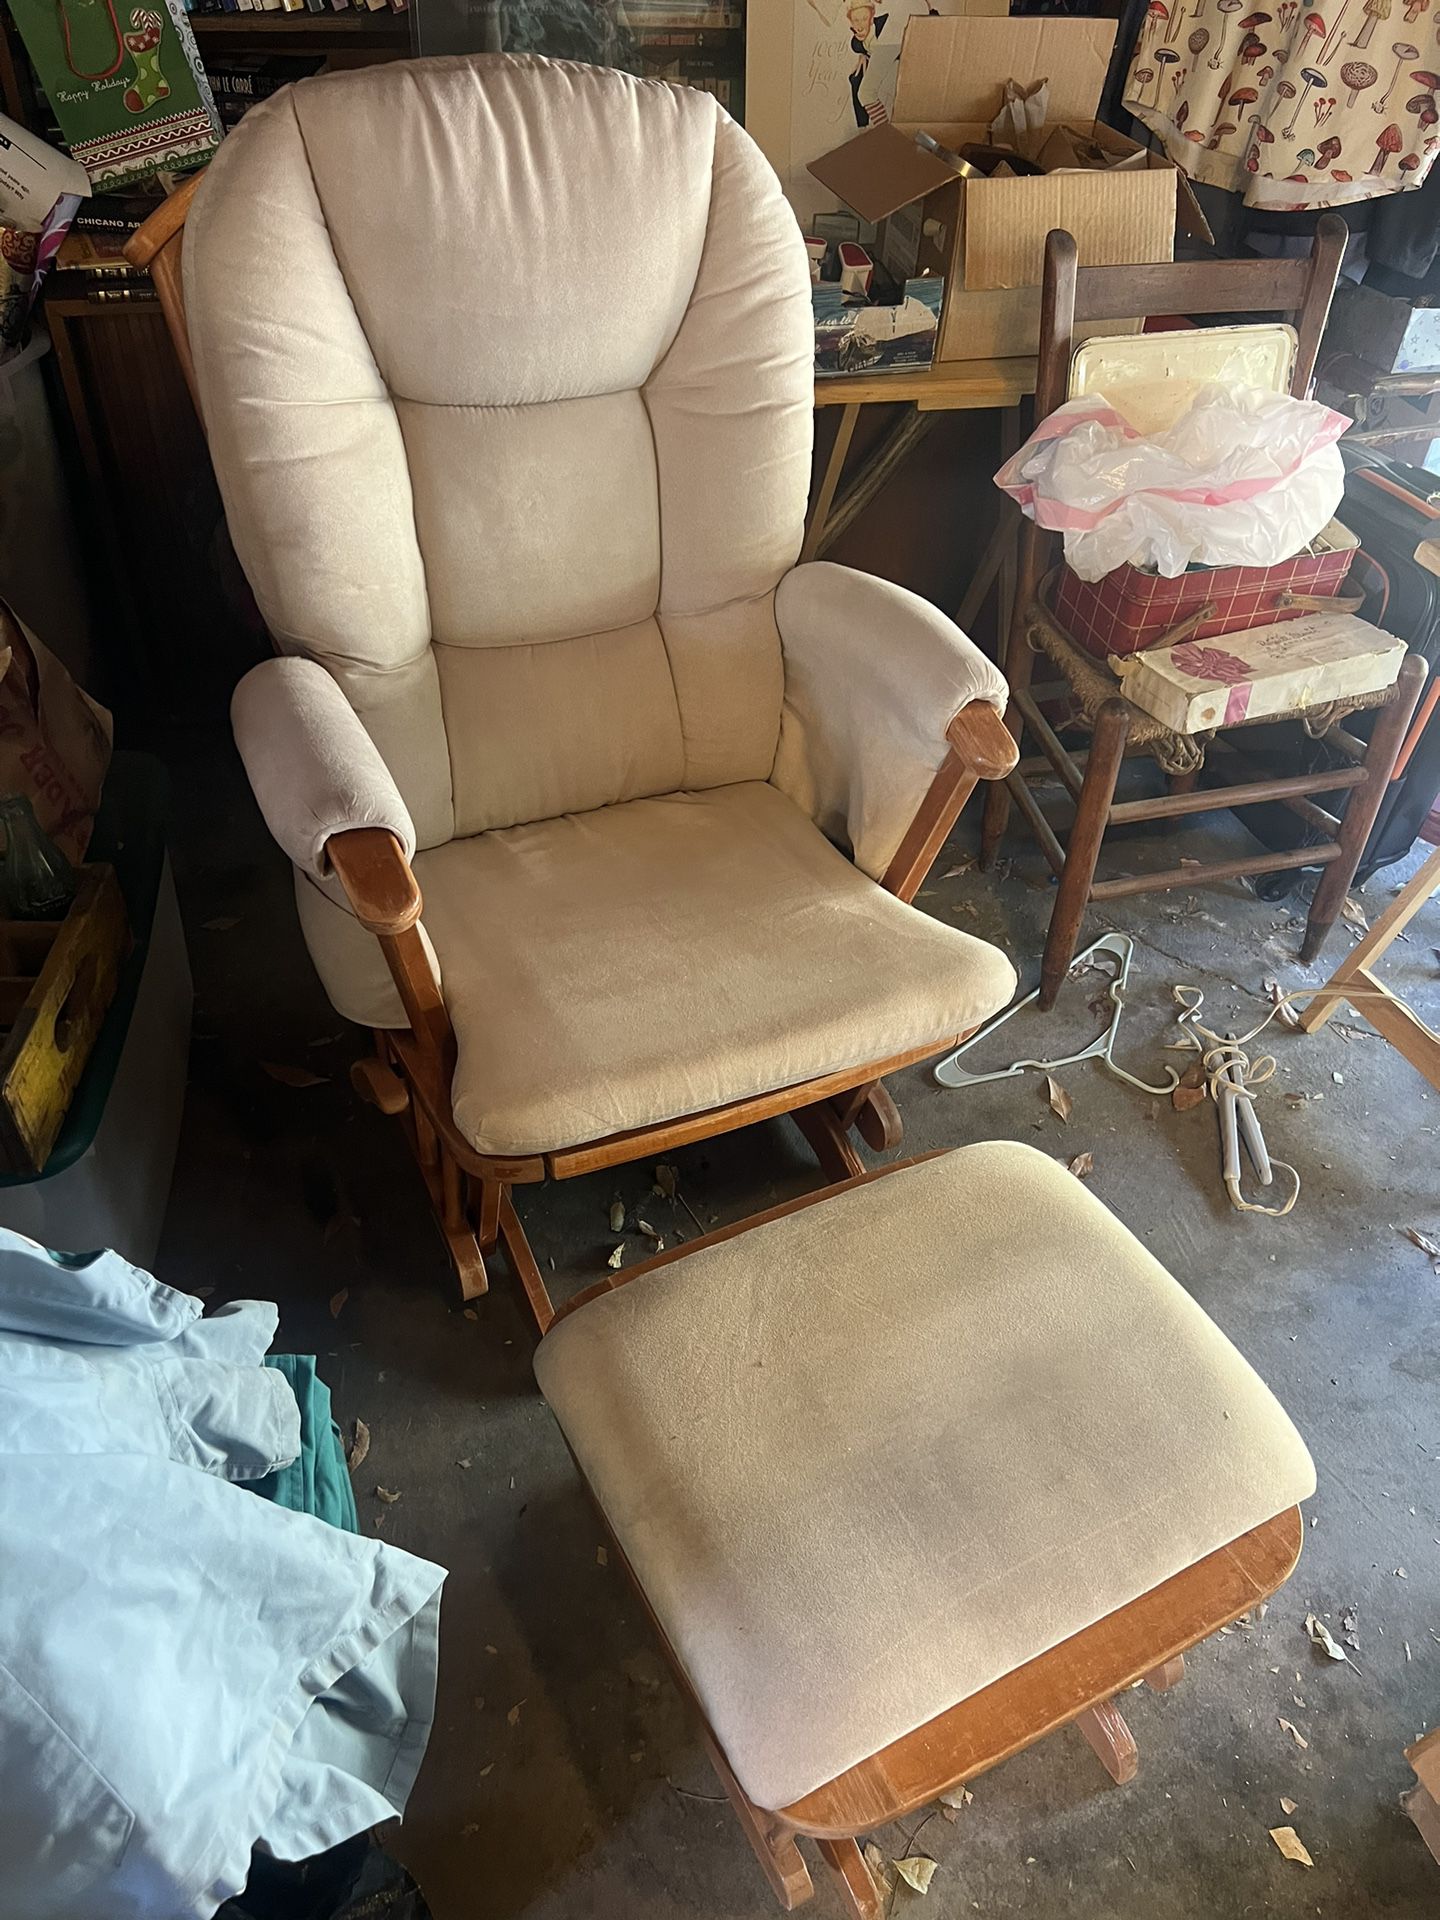 Gliding Rocking Chair (like Floating On A Cloud) Moms Secret To Happy Baby Hand Made In Canada… Quality Craftsmanship! Sure To Last Years & Years